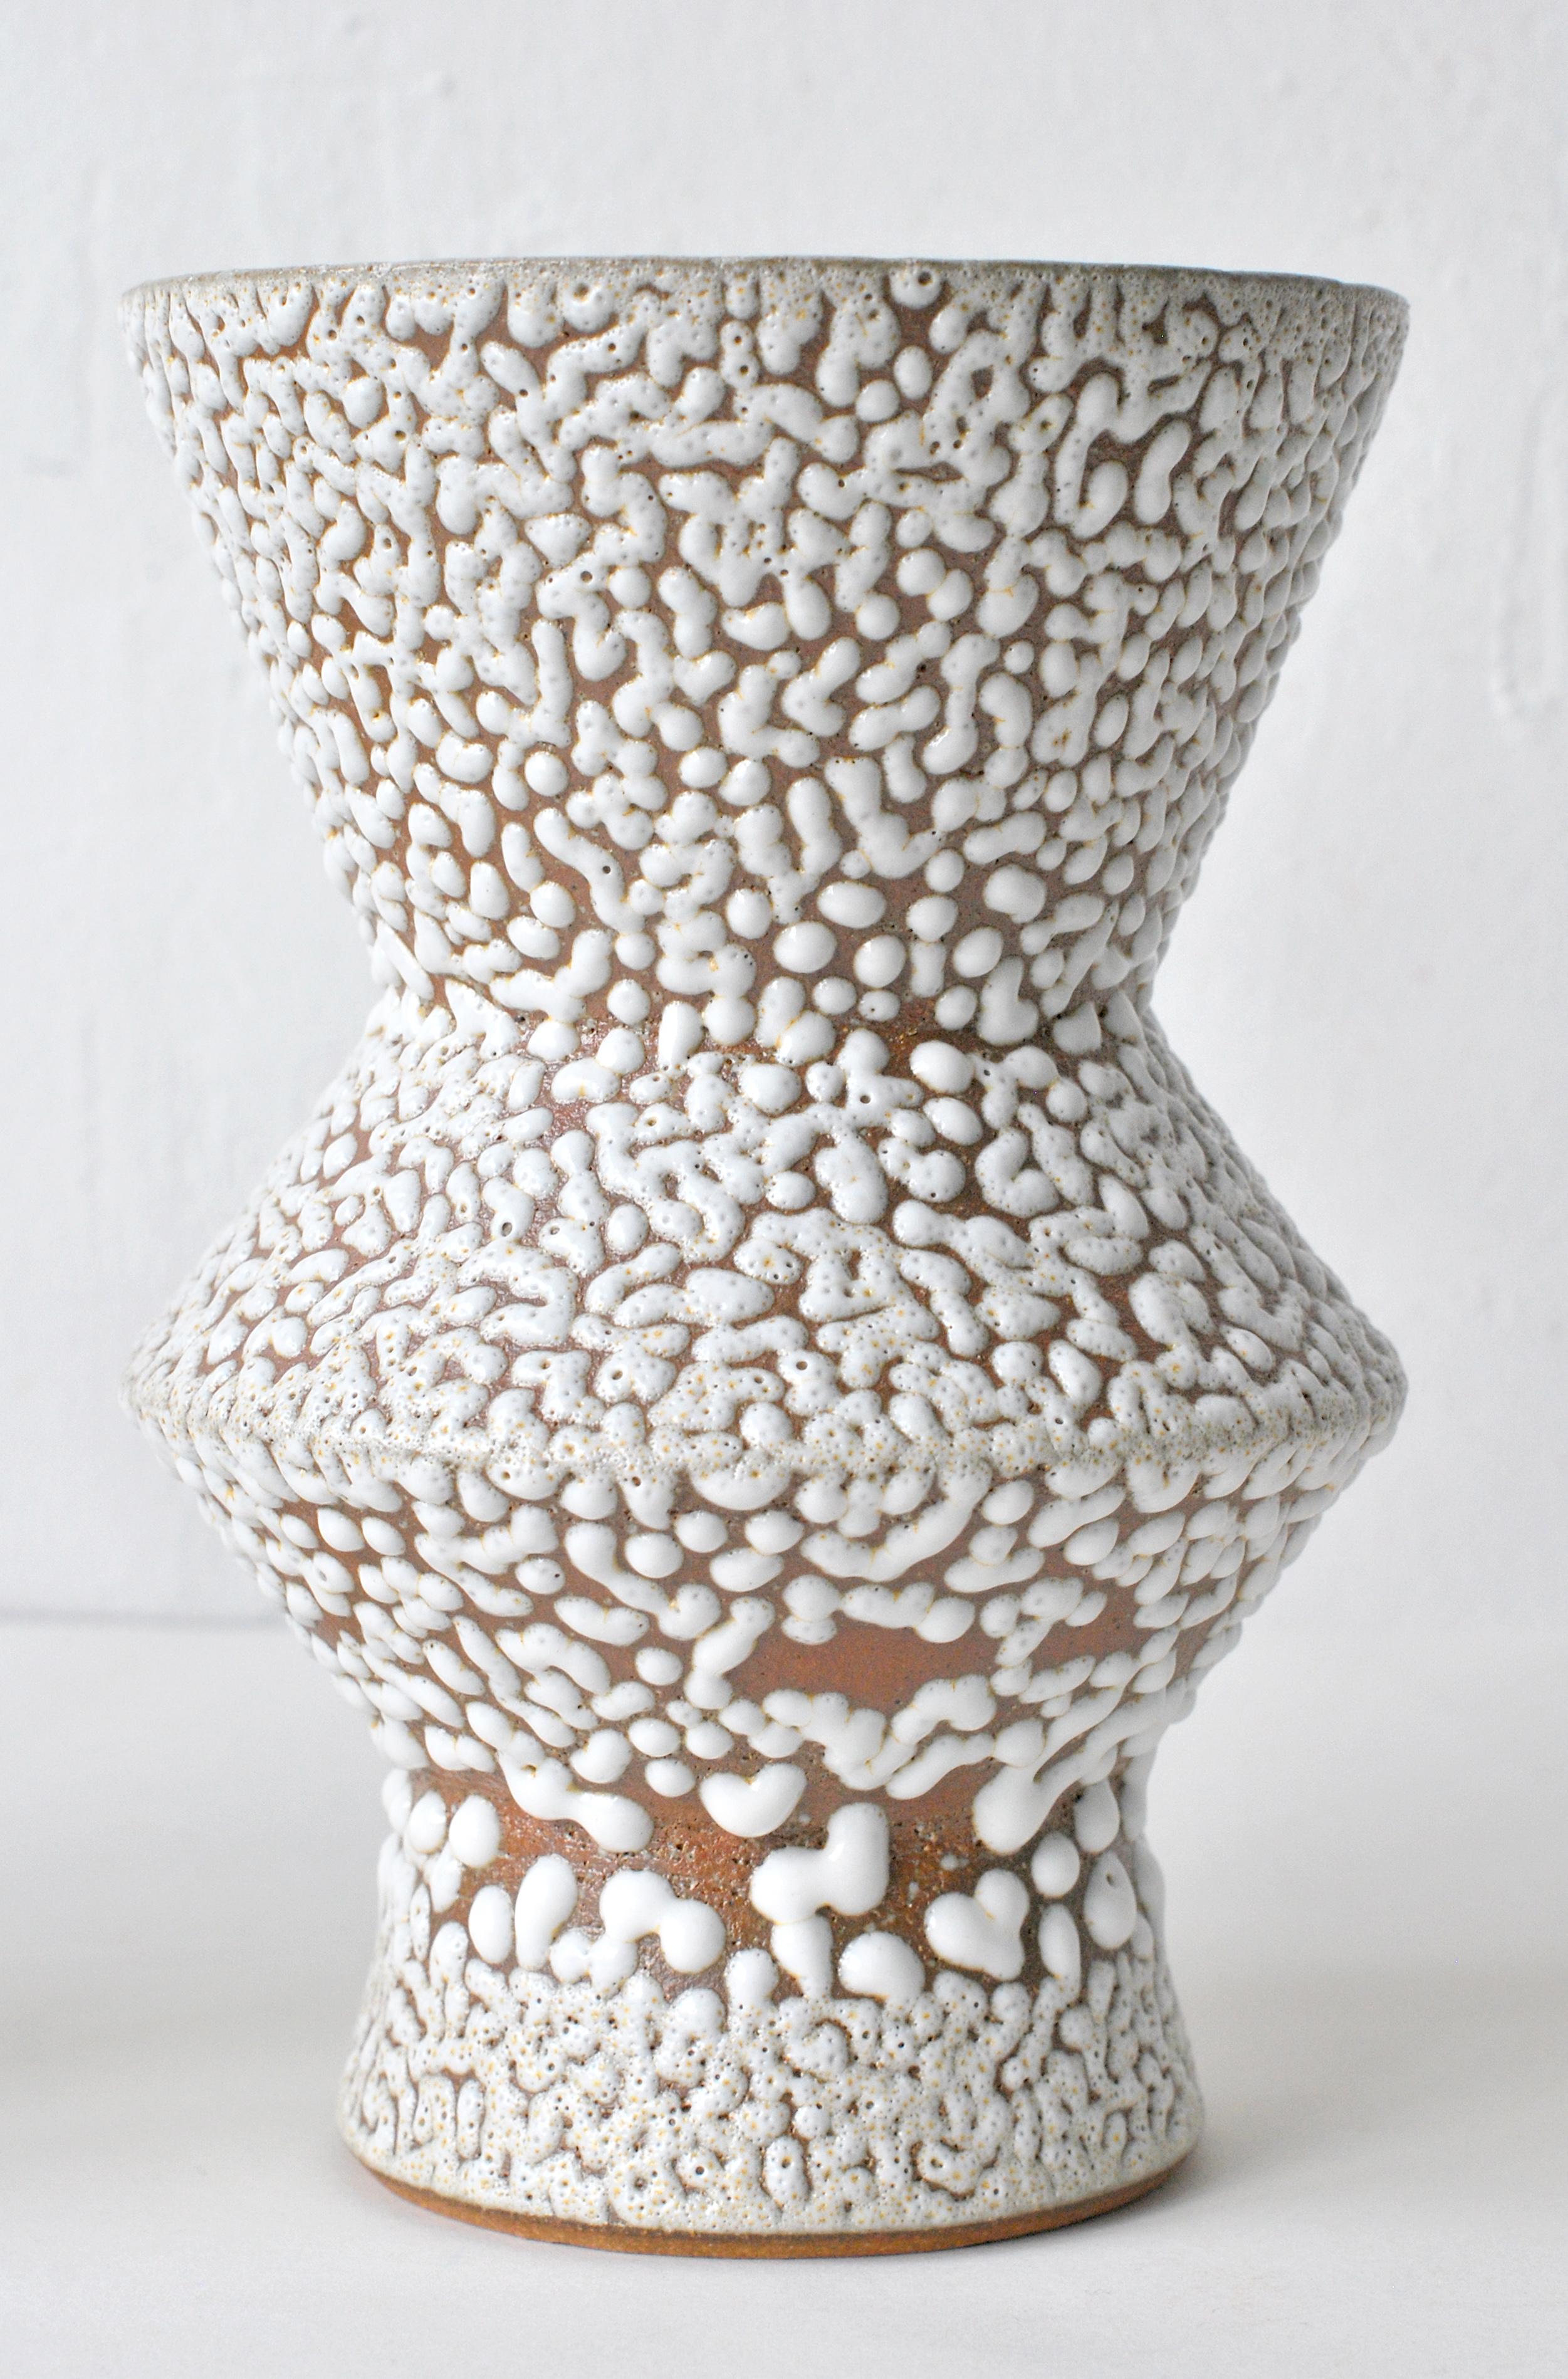 White stoneware vase by Moïo Studio
Dimensions: 17 x 9 x 9 cm
Materials: White crawl glaze on tan stoneware

Is the Berlin-based ceramic art studio of French-Palestinian artist Maia Beyrouti. It was created in 2016 as a result of the desire to